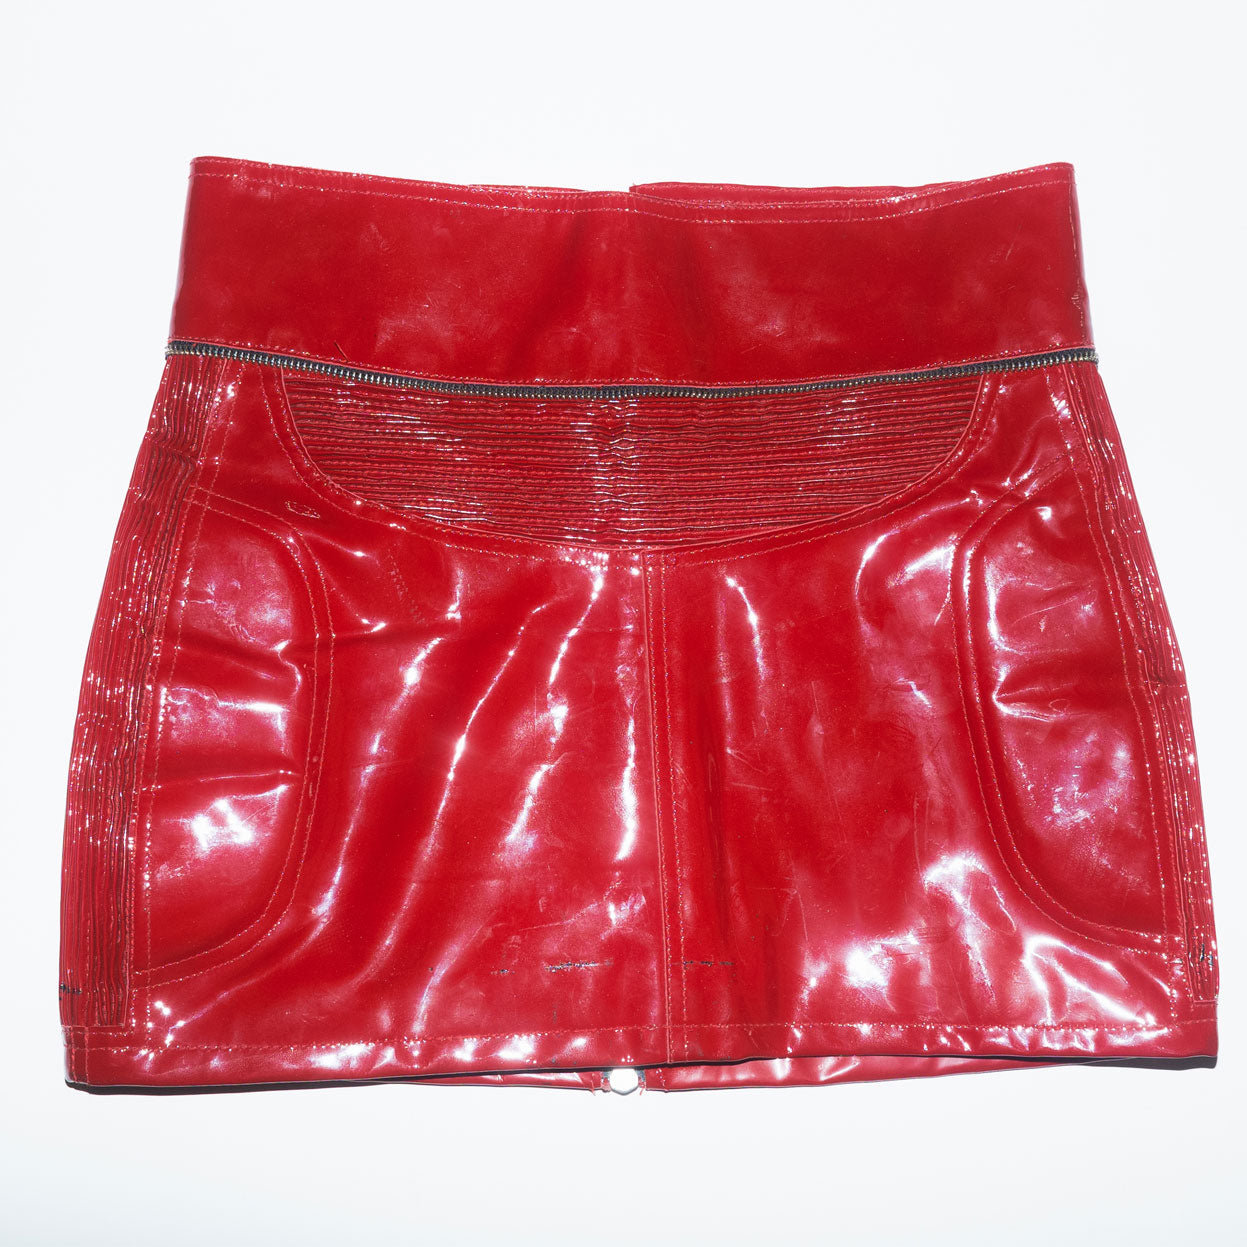 Archive Padded Mini skirt in Red Patent Leather